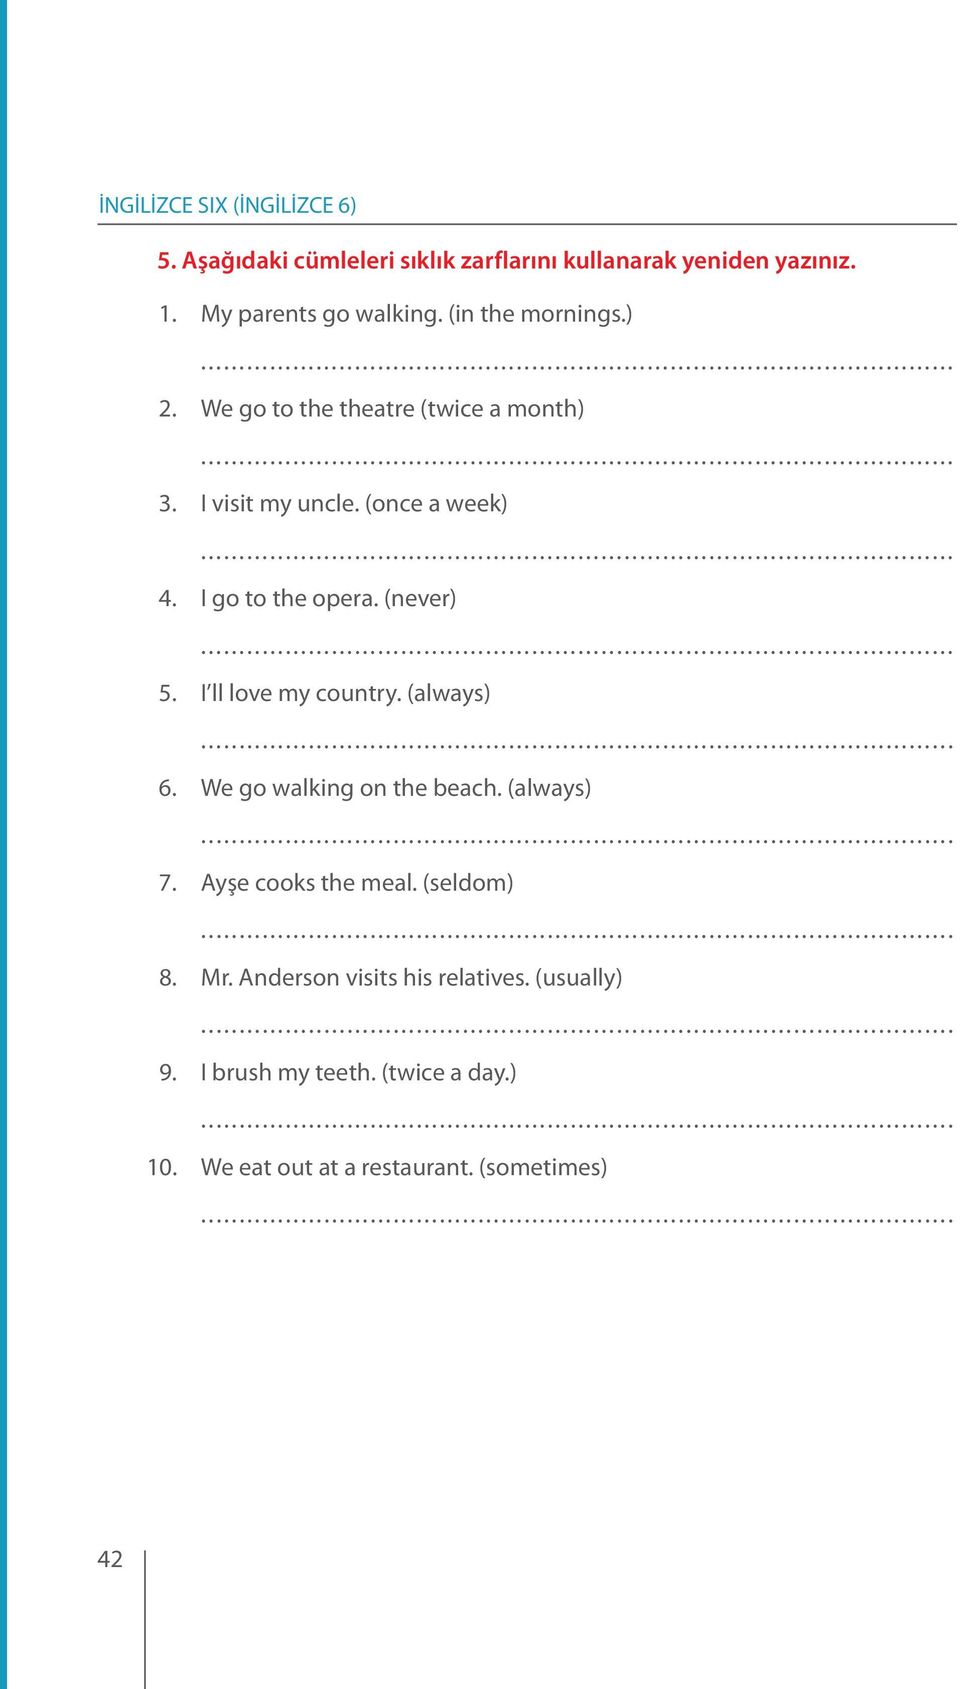 I ll love my country. (always) 6. We go walking on the beach. (always) 7. Ayşe cooks the meal. (seldom) 8. Mr.